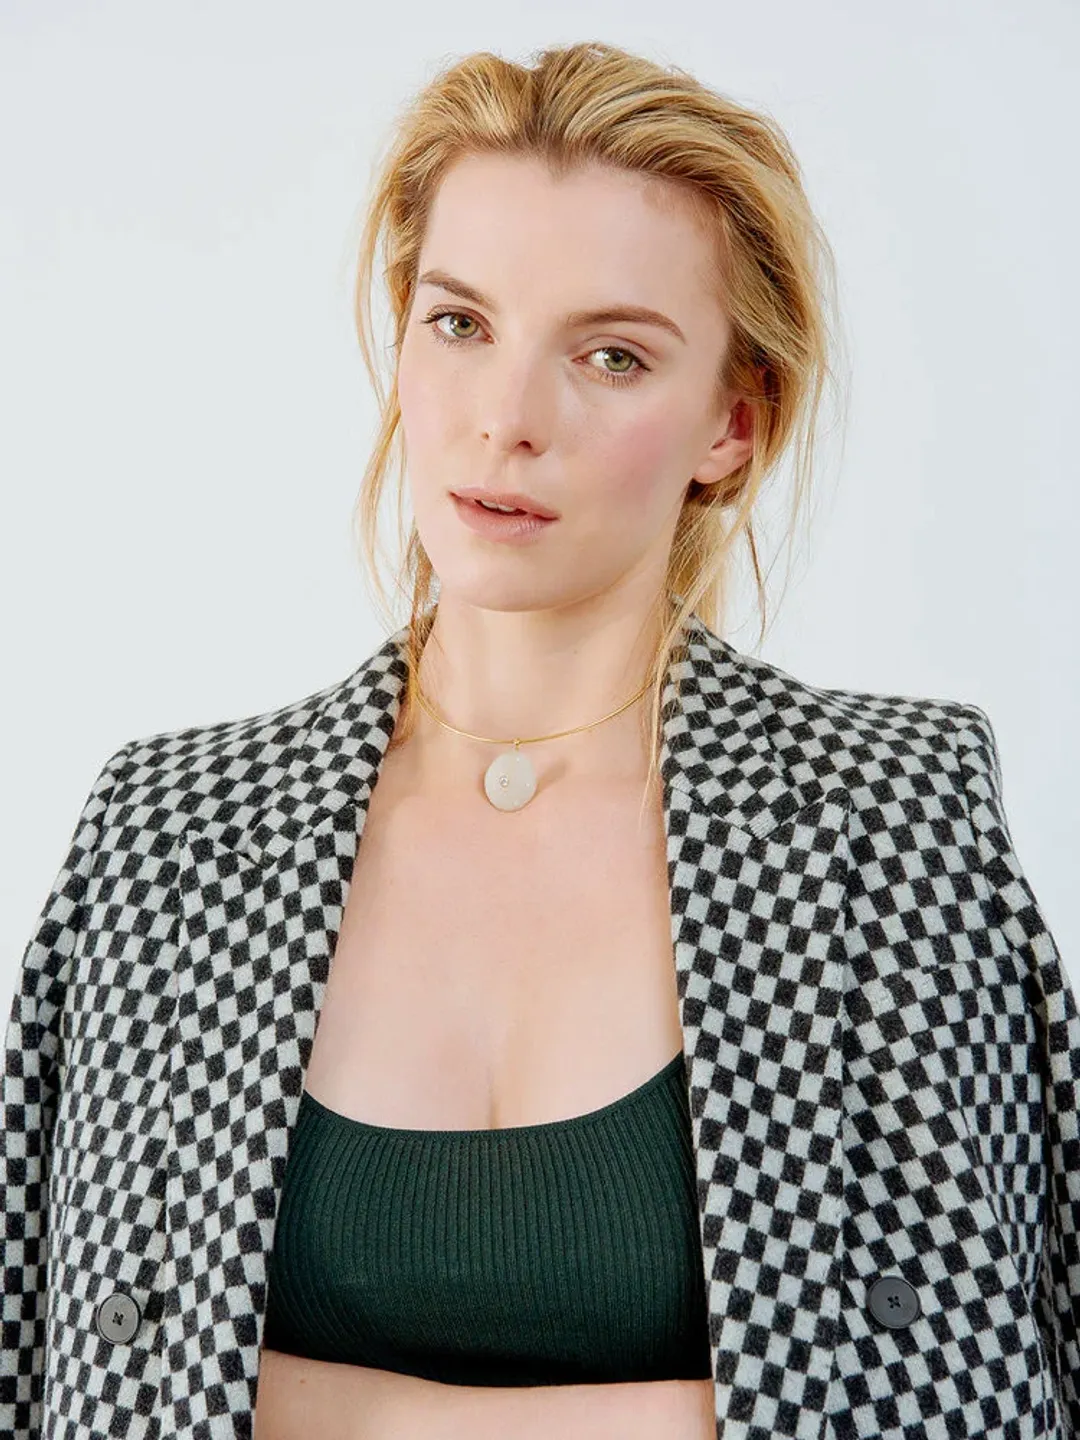 Betty Gilpin relationship